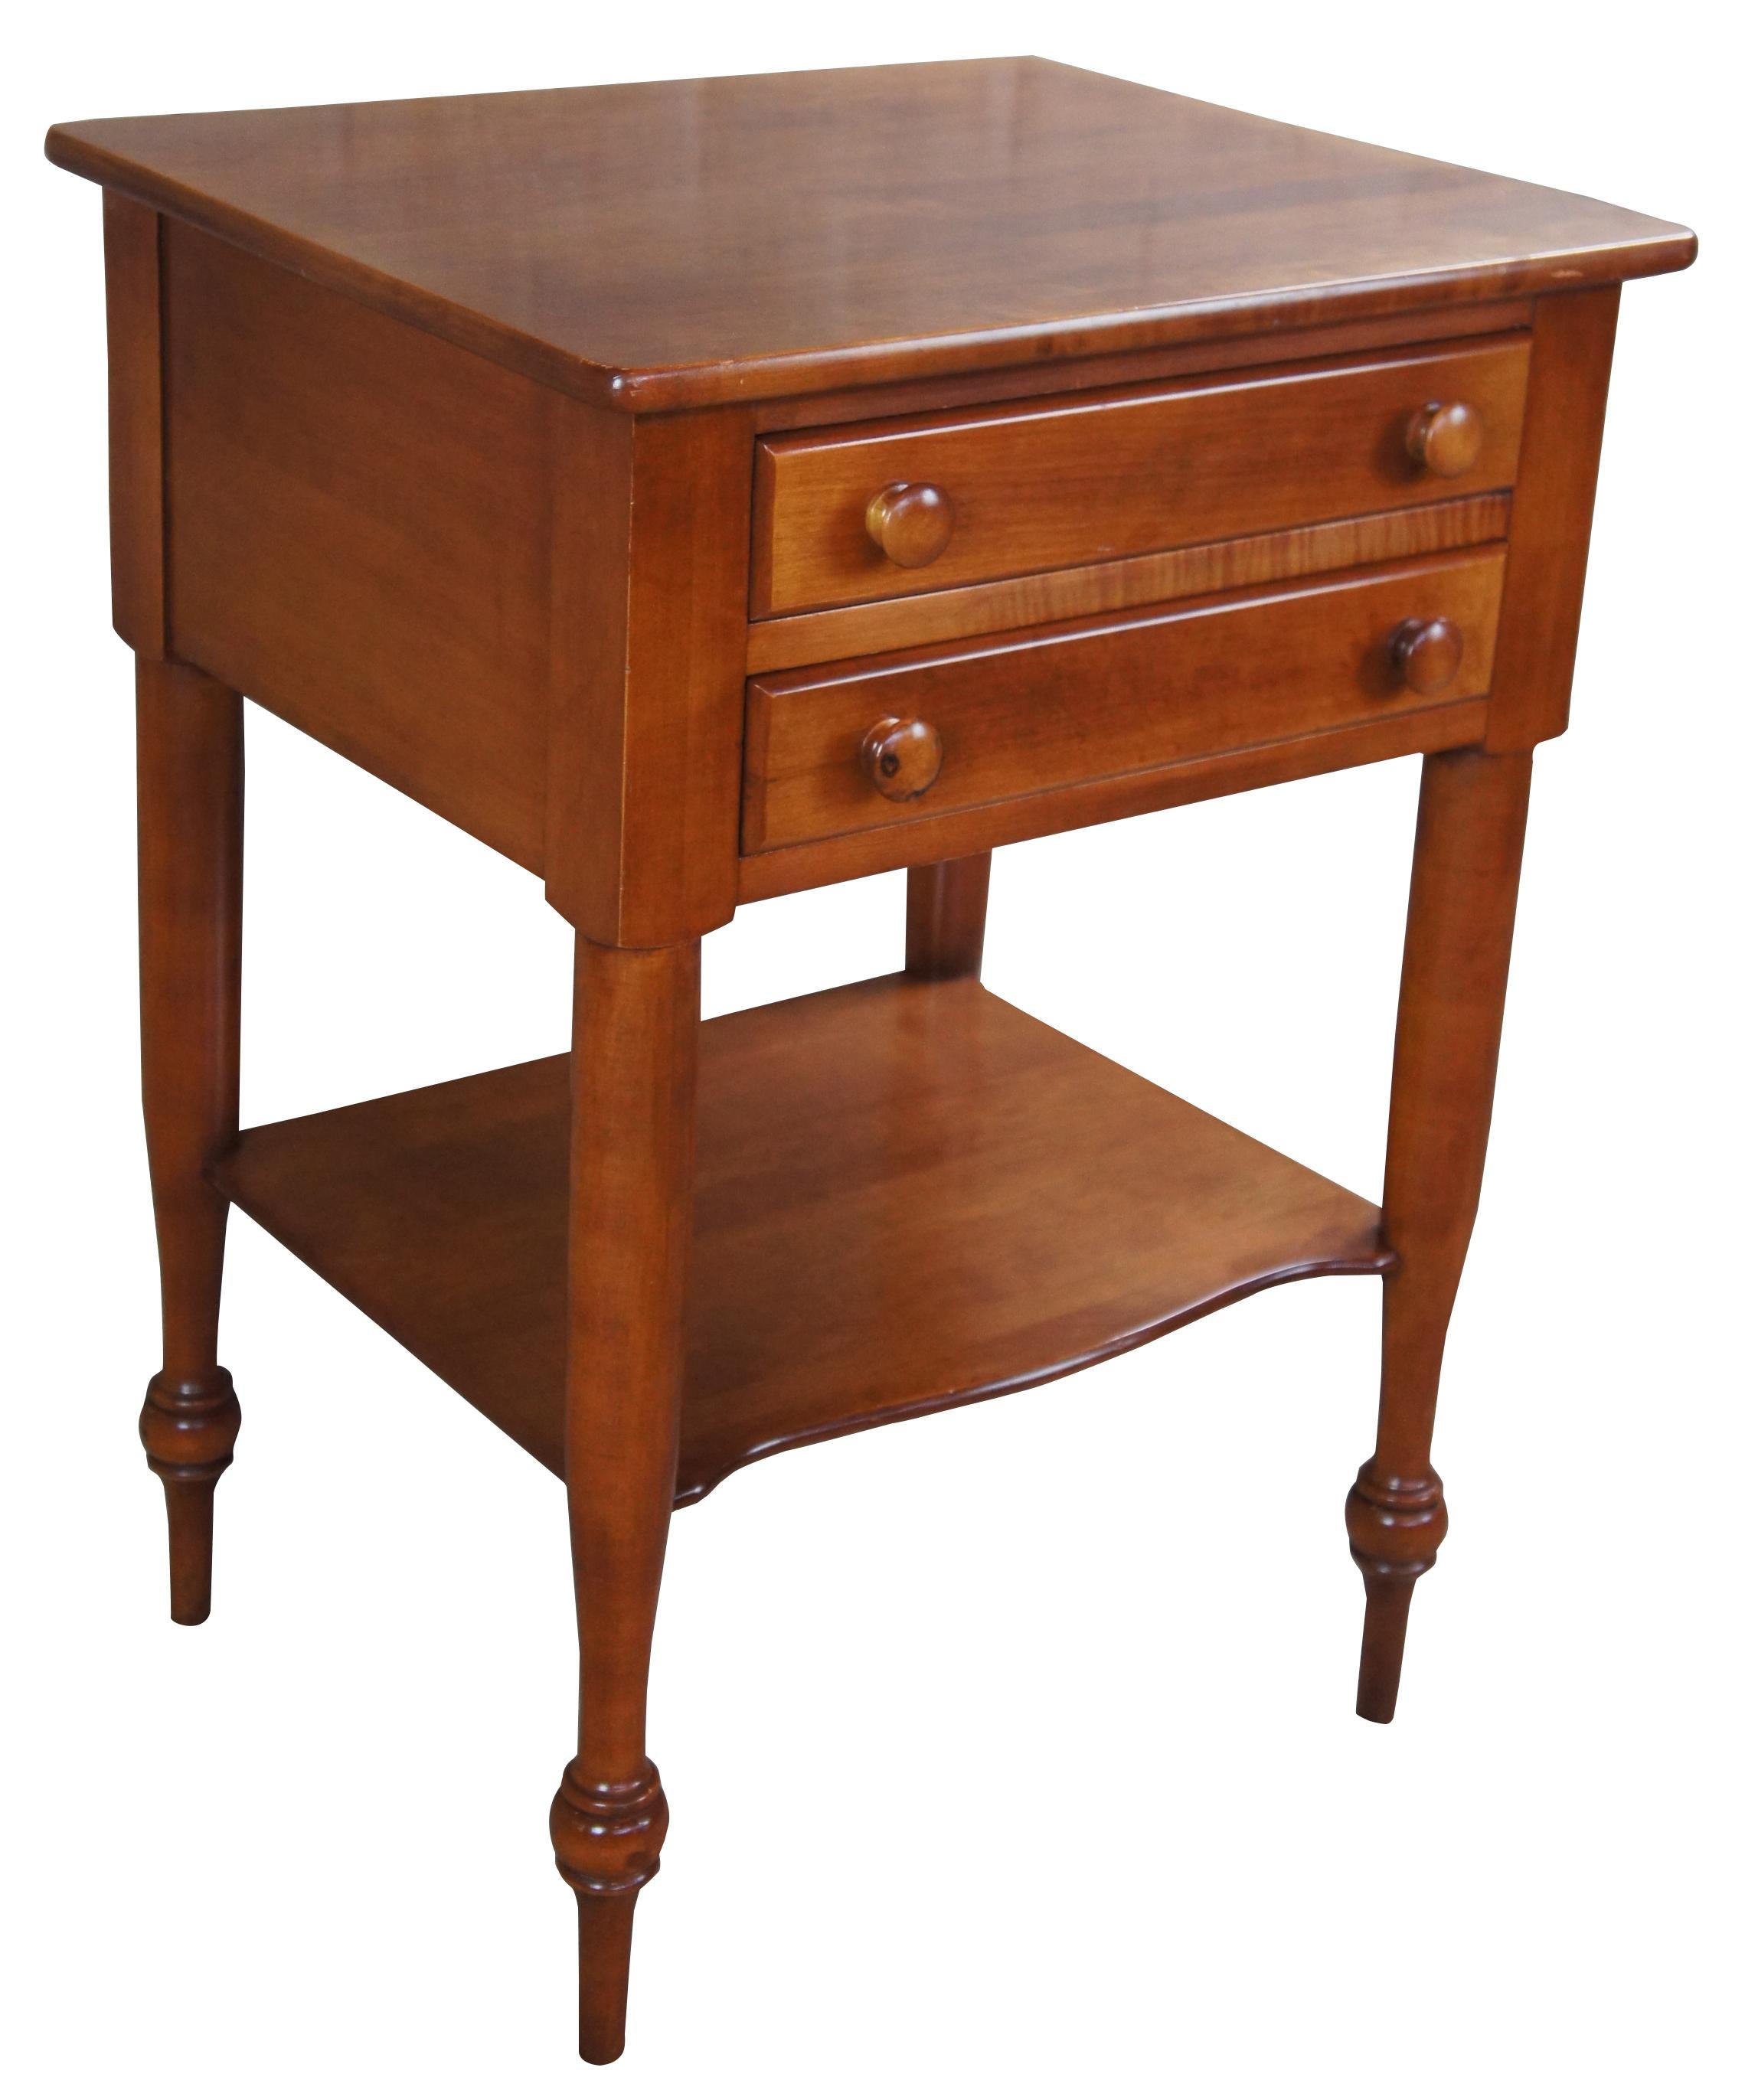 H. Willett maple nightstand or side table, circa 1960s. Features early American styling with wood knobs and turned legs. Measure: 28